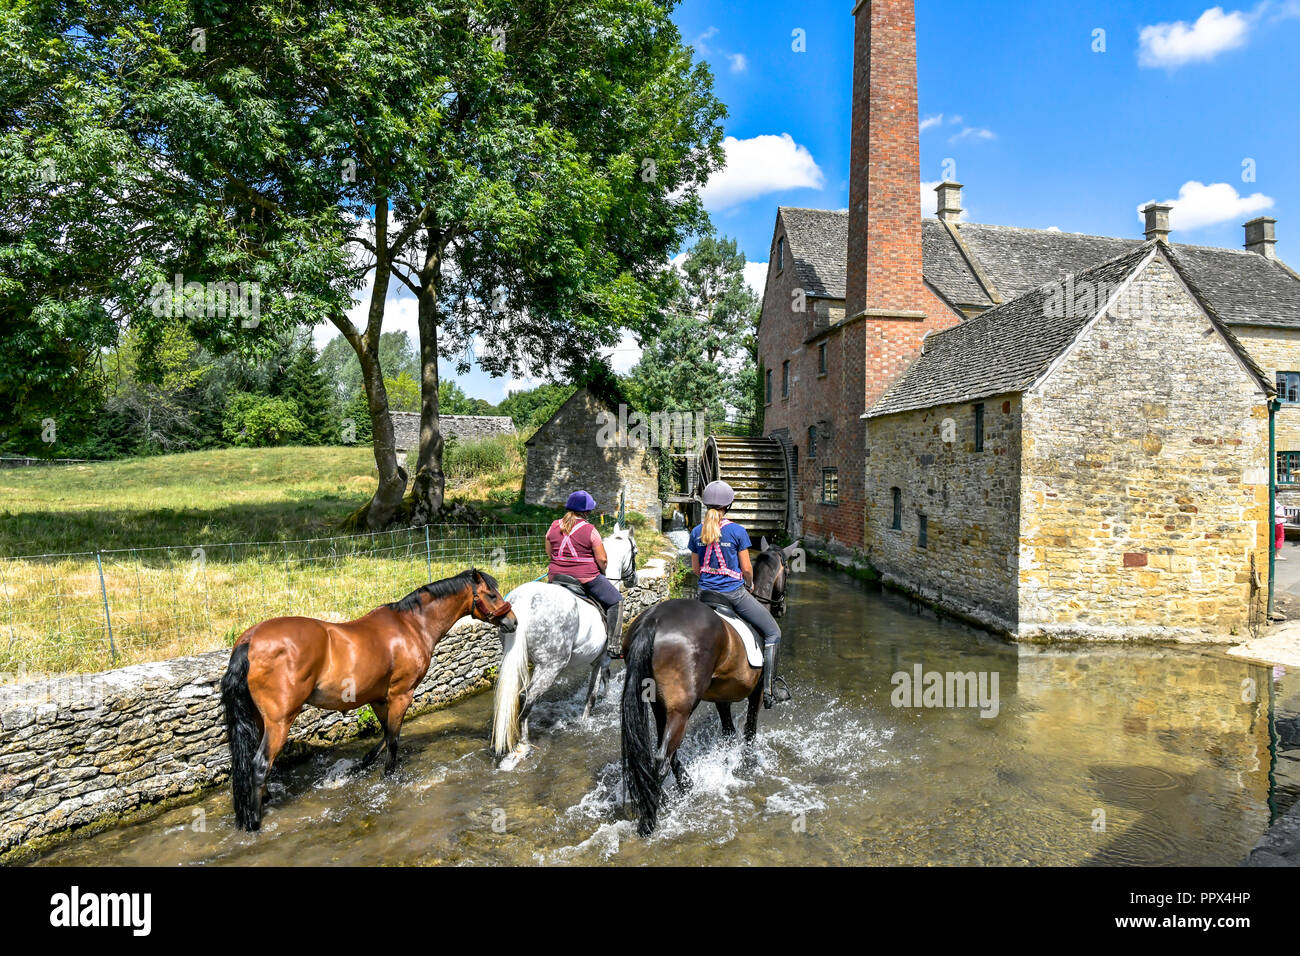 England, Gloucestershire, Cotswolds, Lower Slaughter in summer, riverside cotswold stone cottages Stock Photo